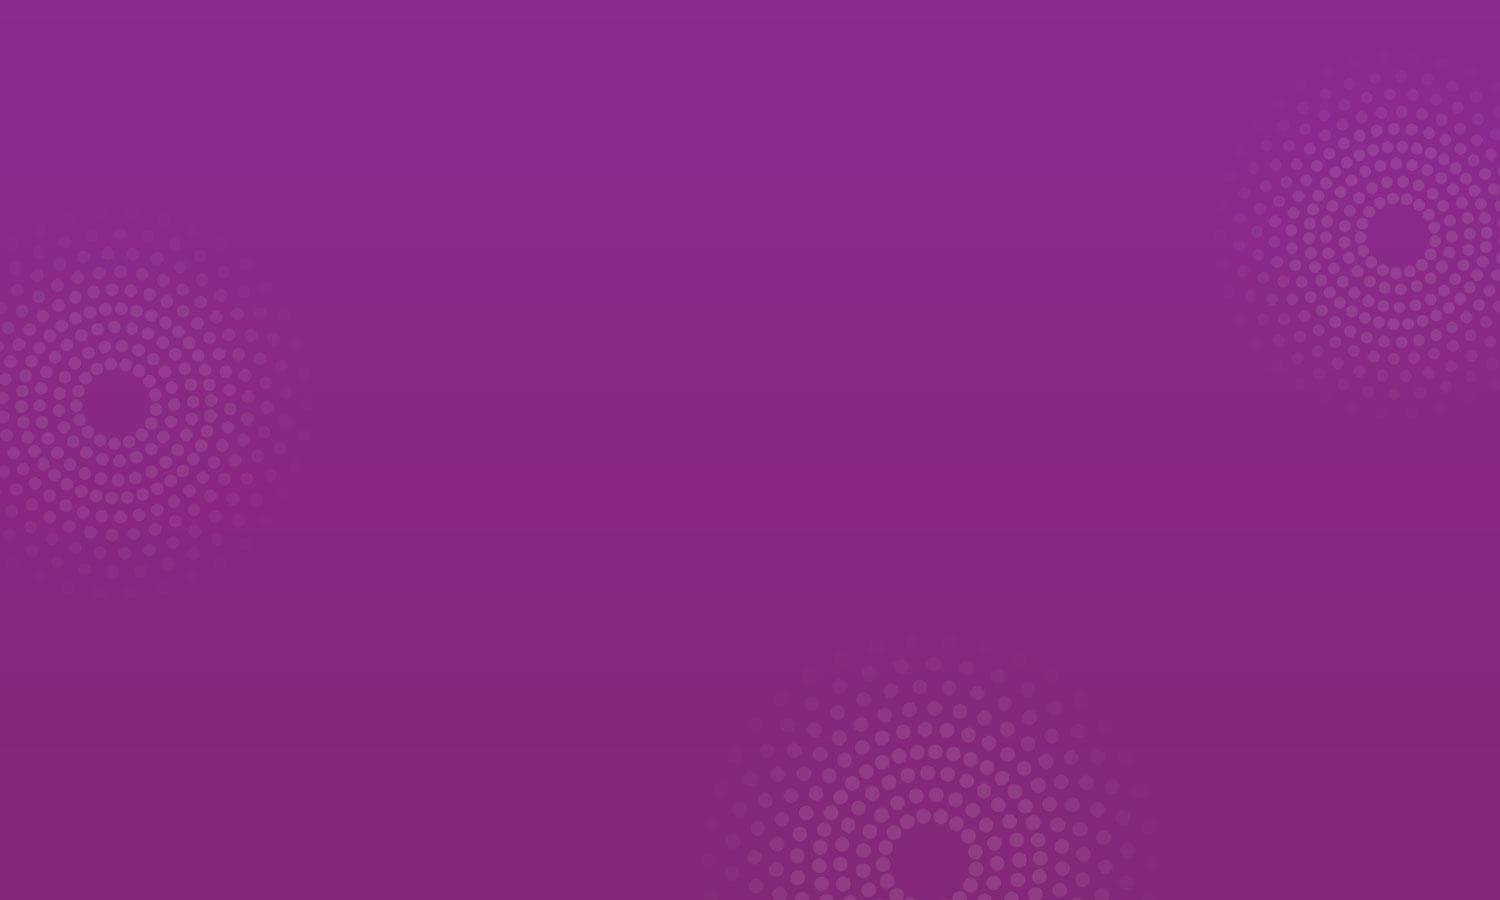 White dots in a circular design on a plum background